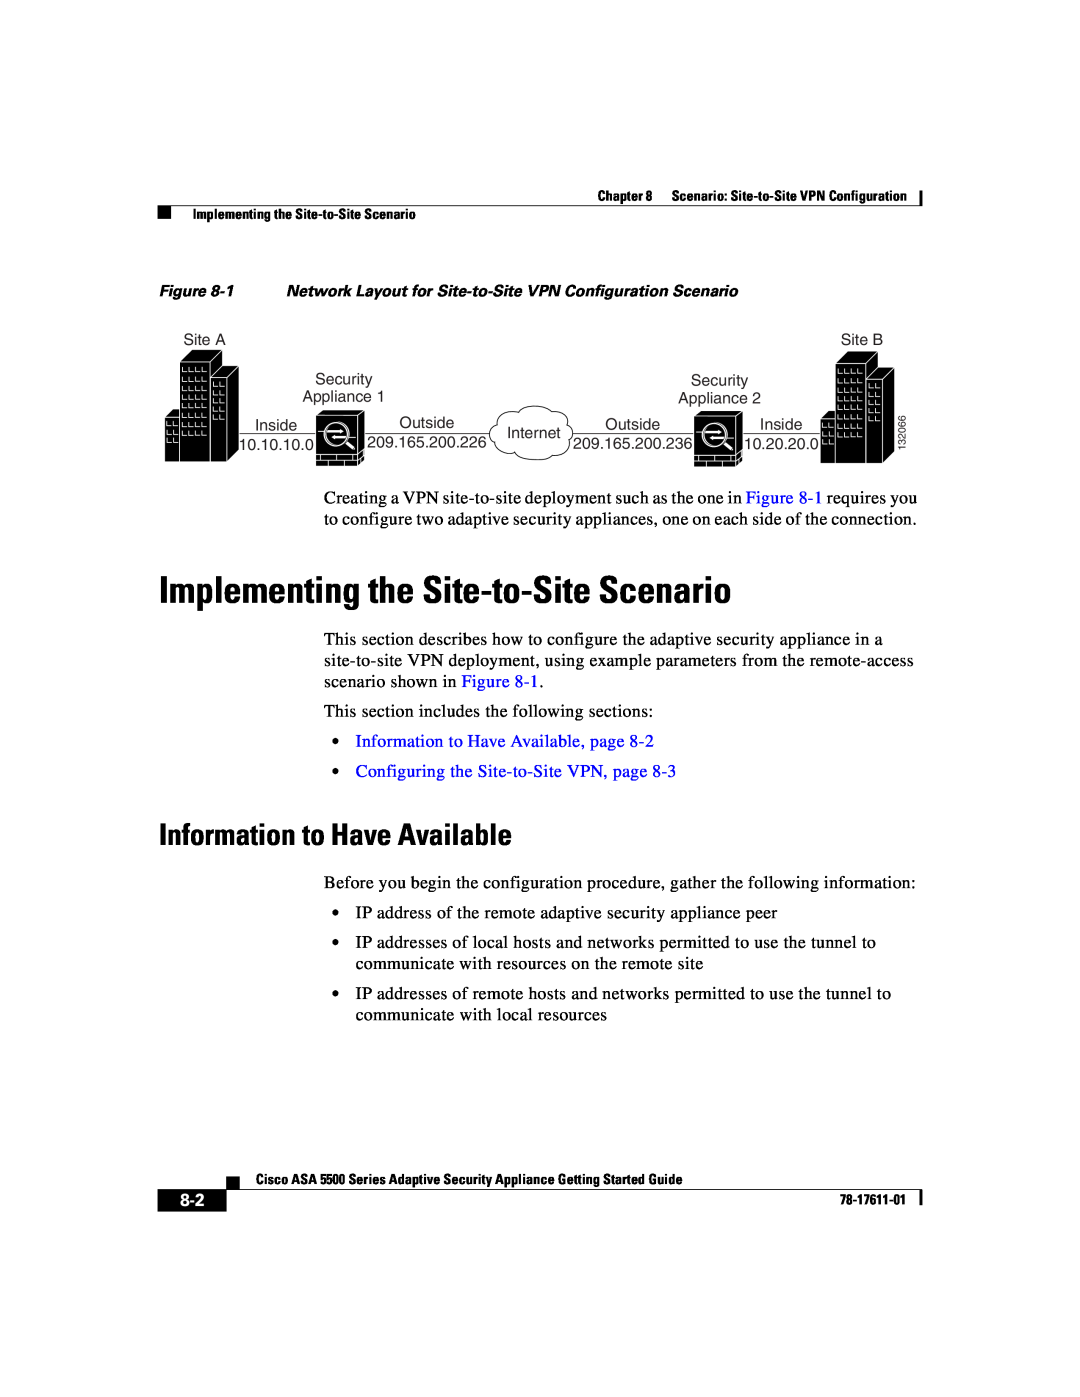 Cisco Systems ASA 5500 manual Implementing the Site-to-SiteScenario, Information to Have Available 